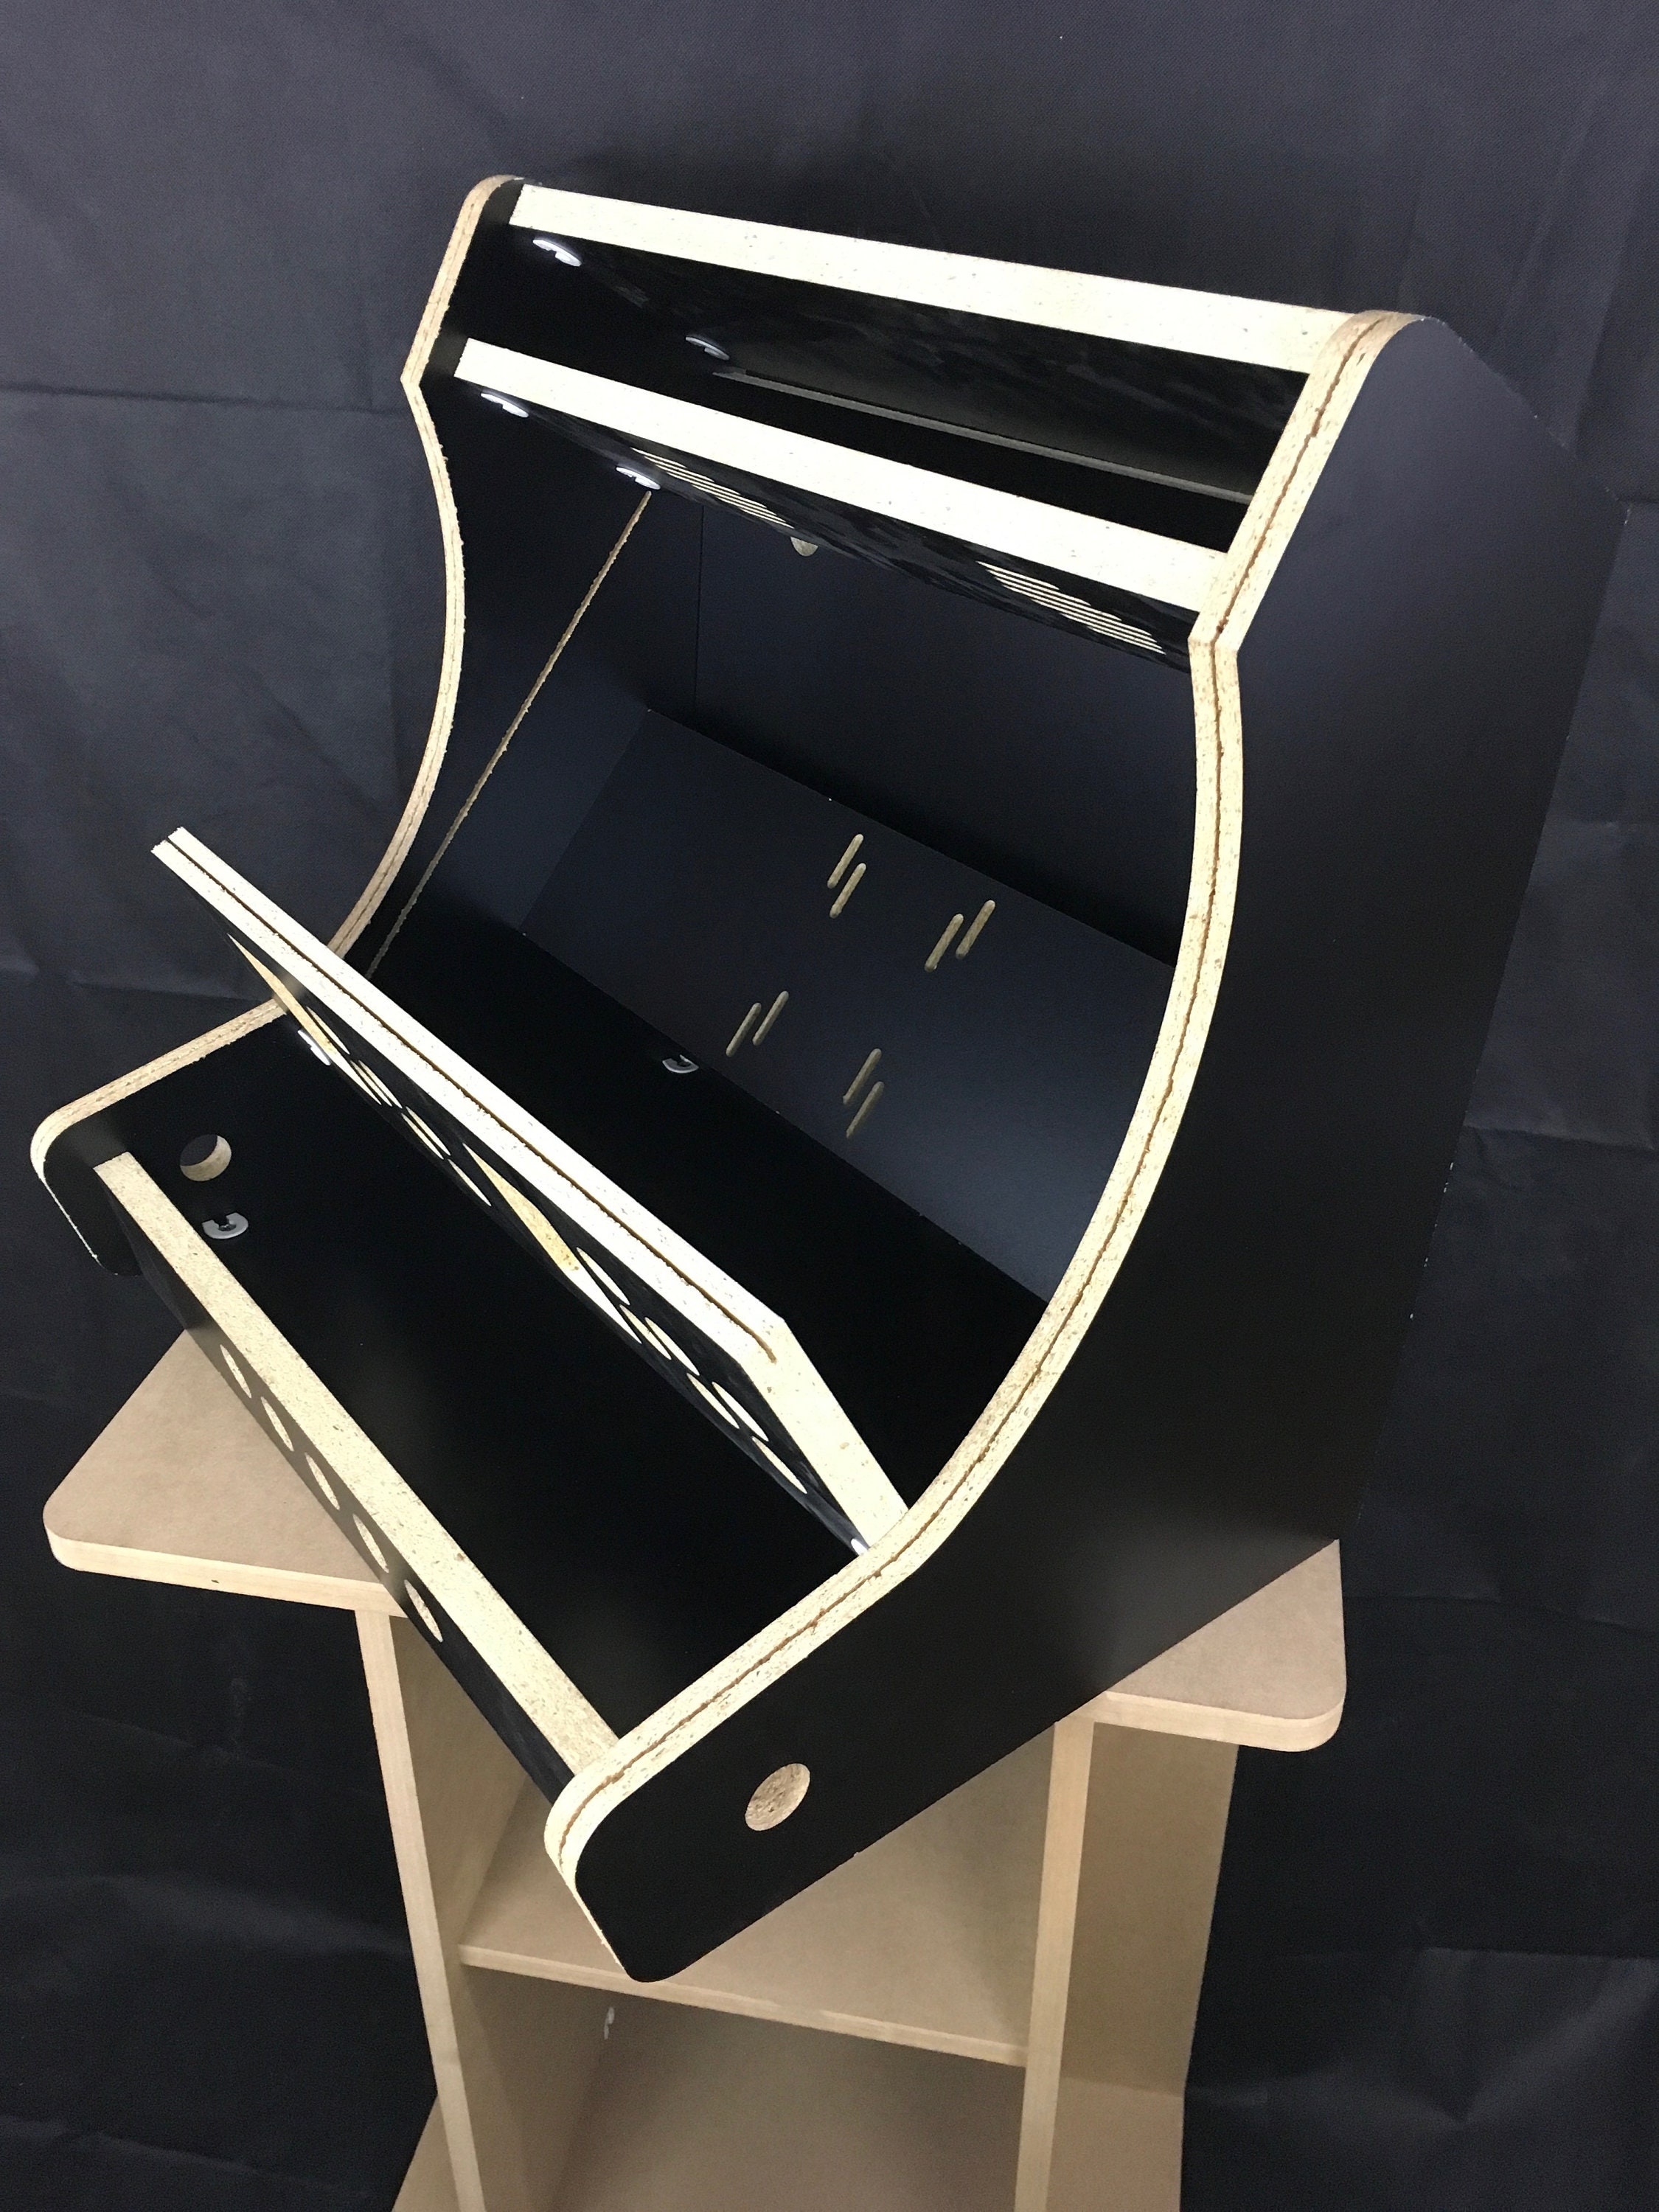 LVL24 2 Player Bartop Arcade Cabinet Kit for up to 24 Screens (HAPP o –  LEP1 Customs